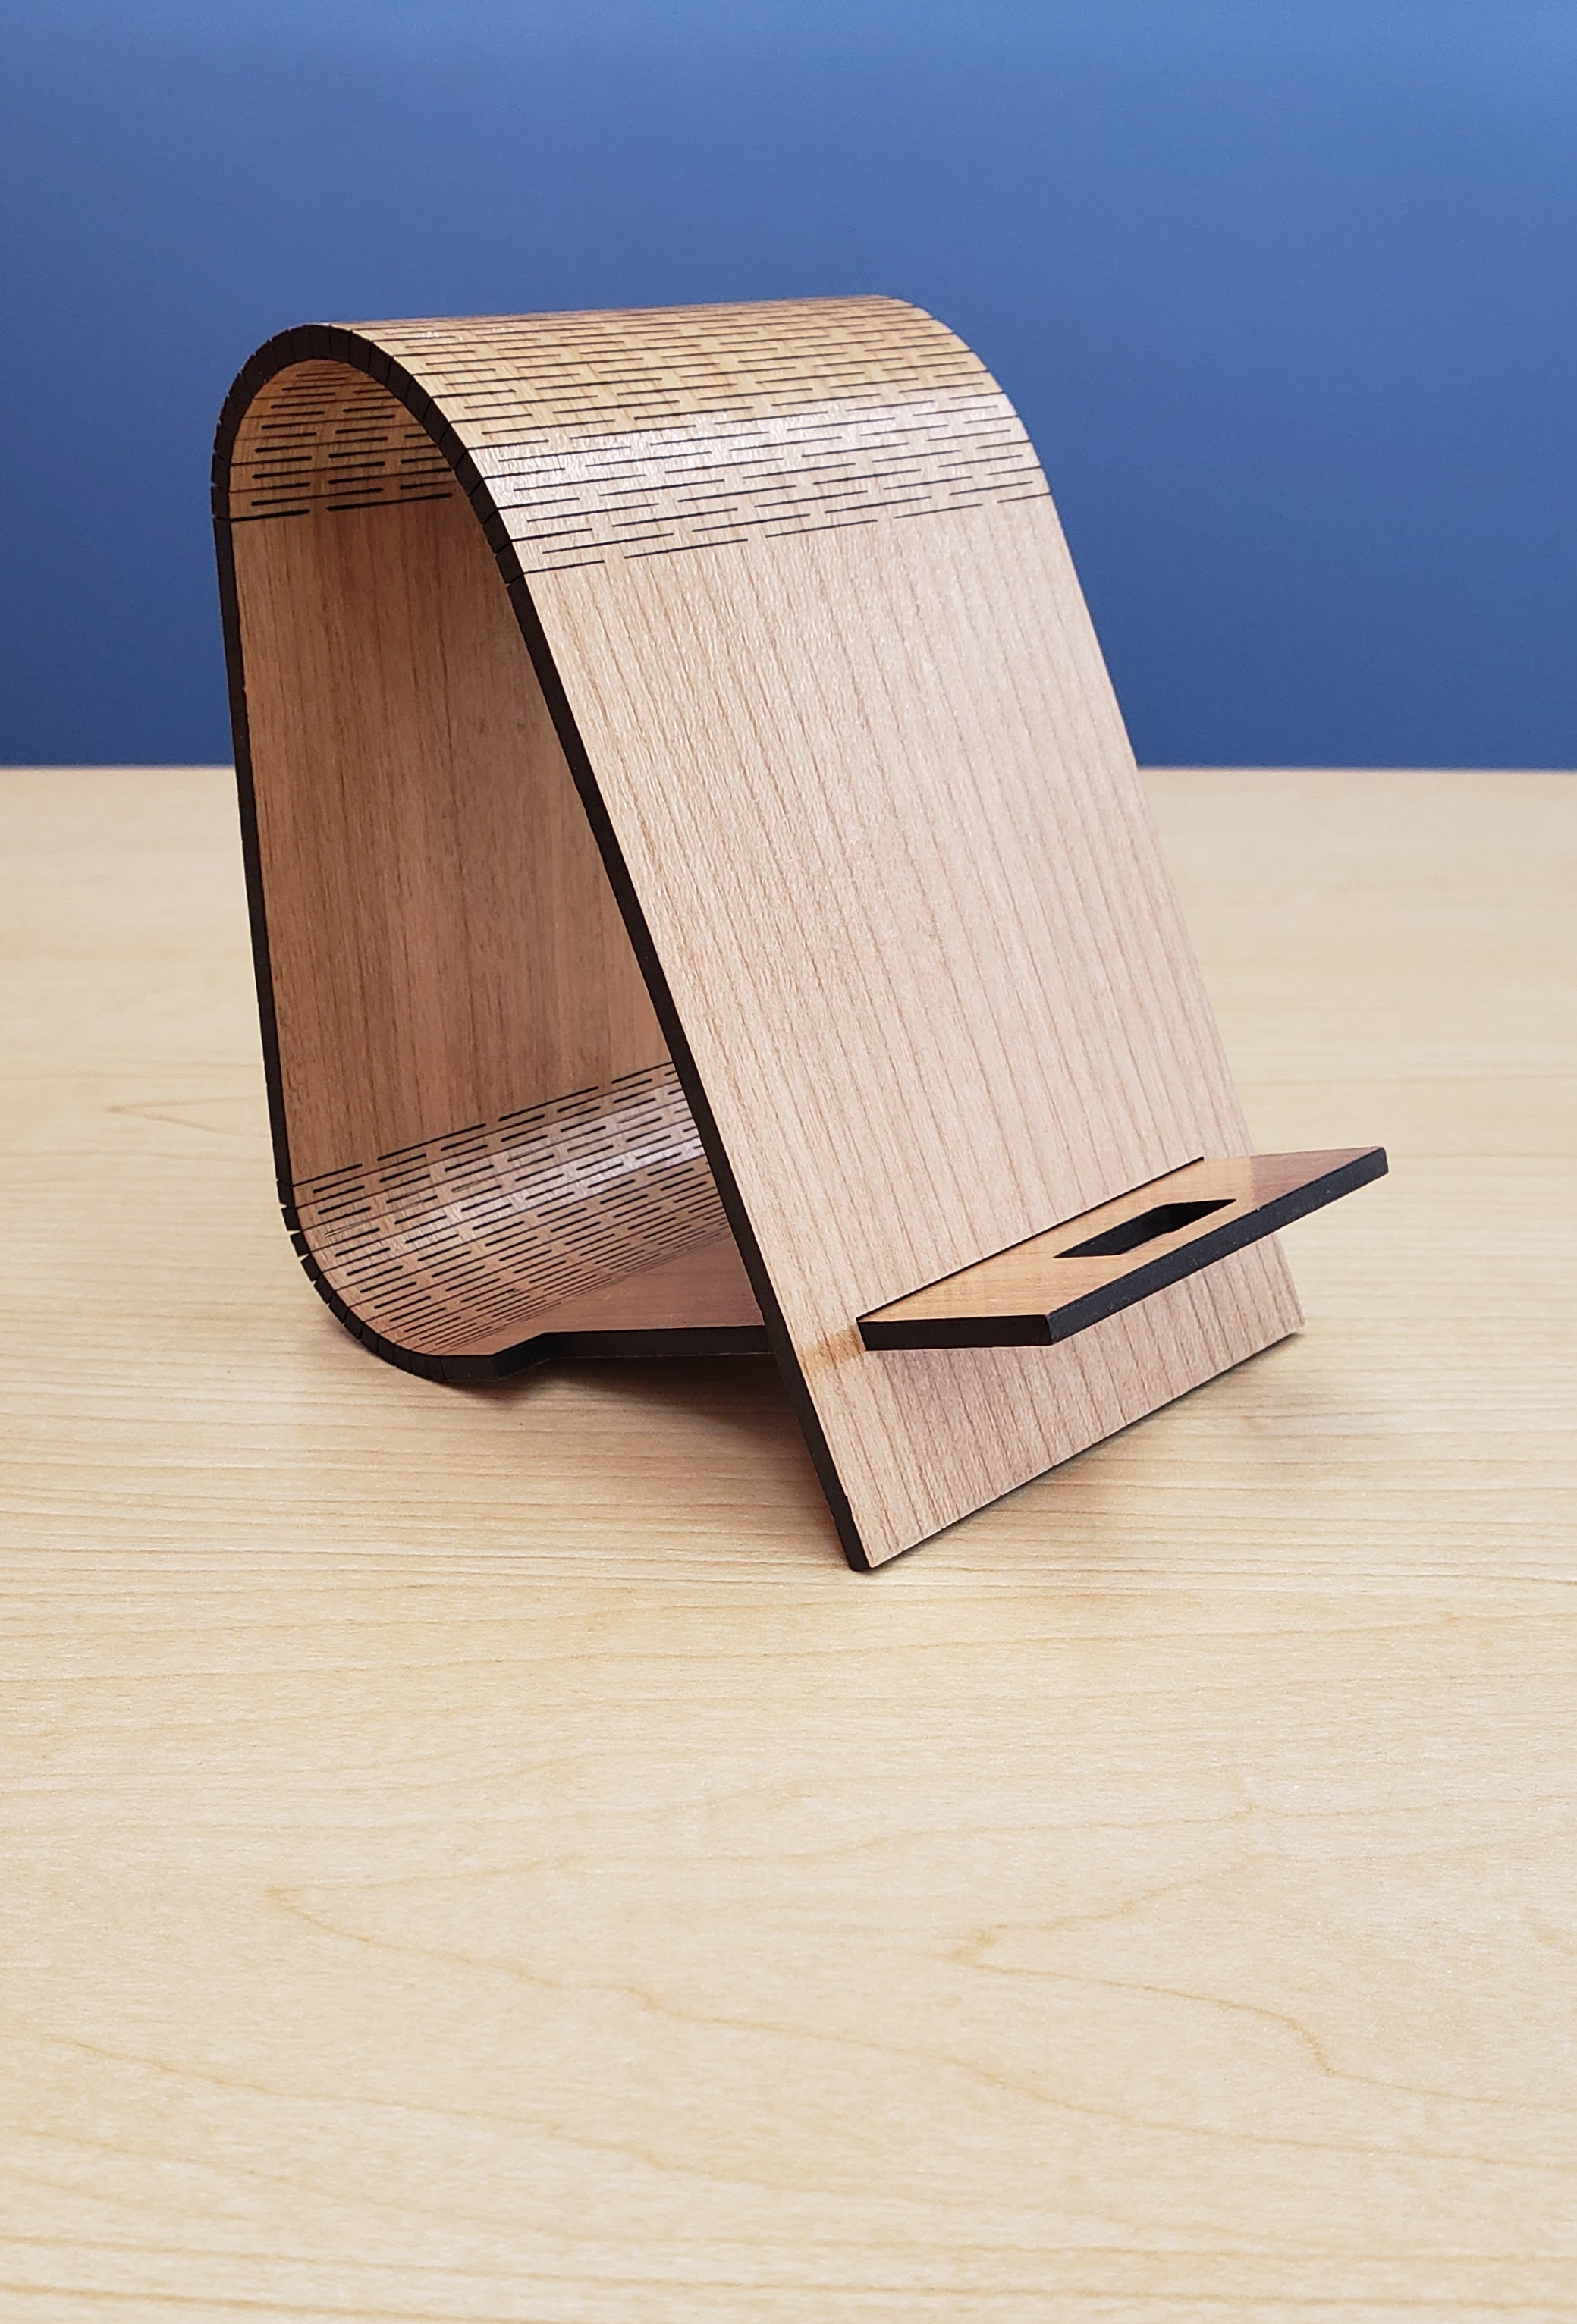 wooden cell phone holder shown on a table